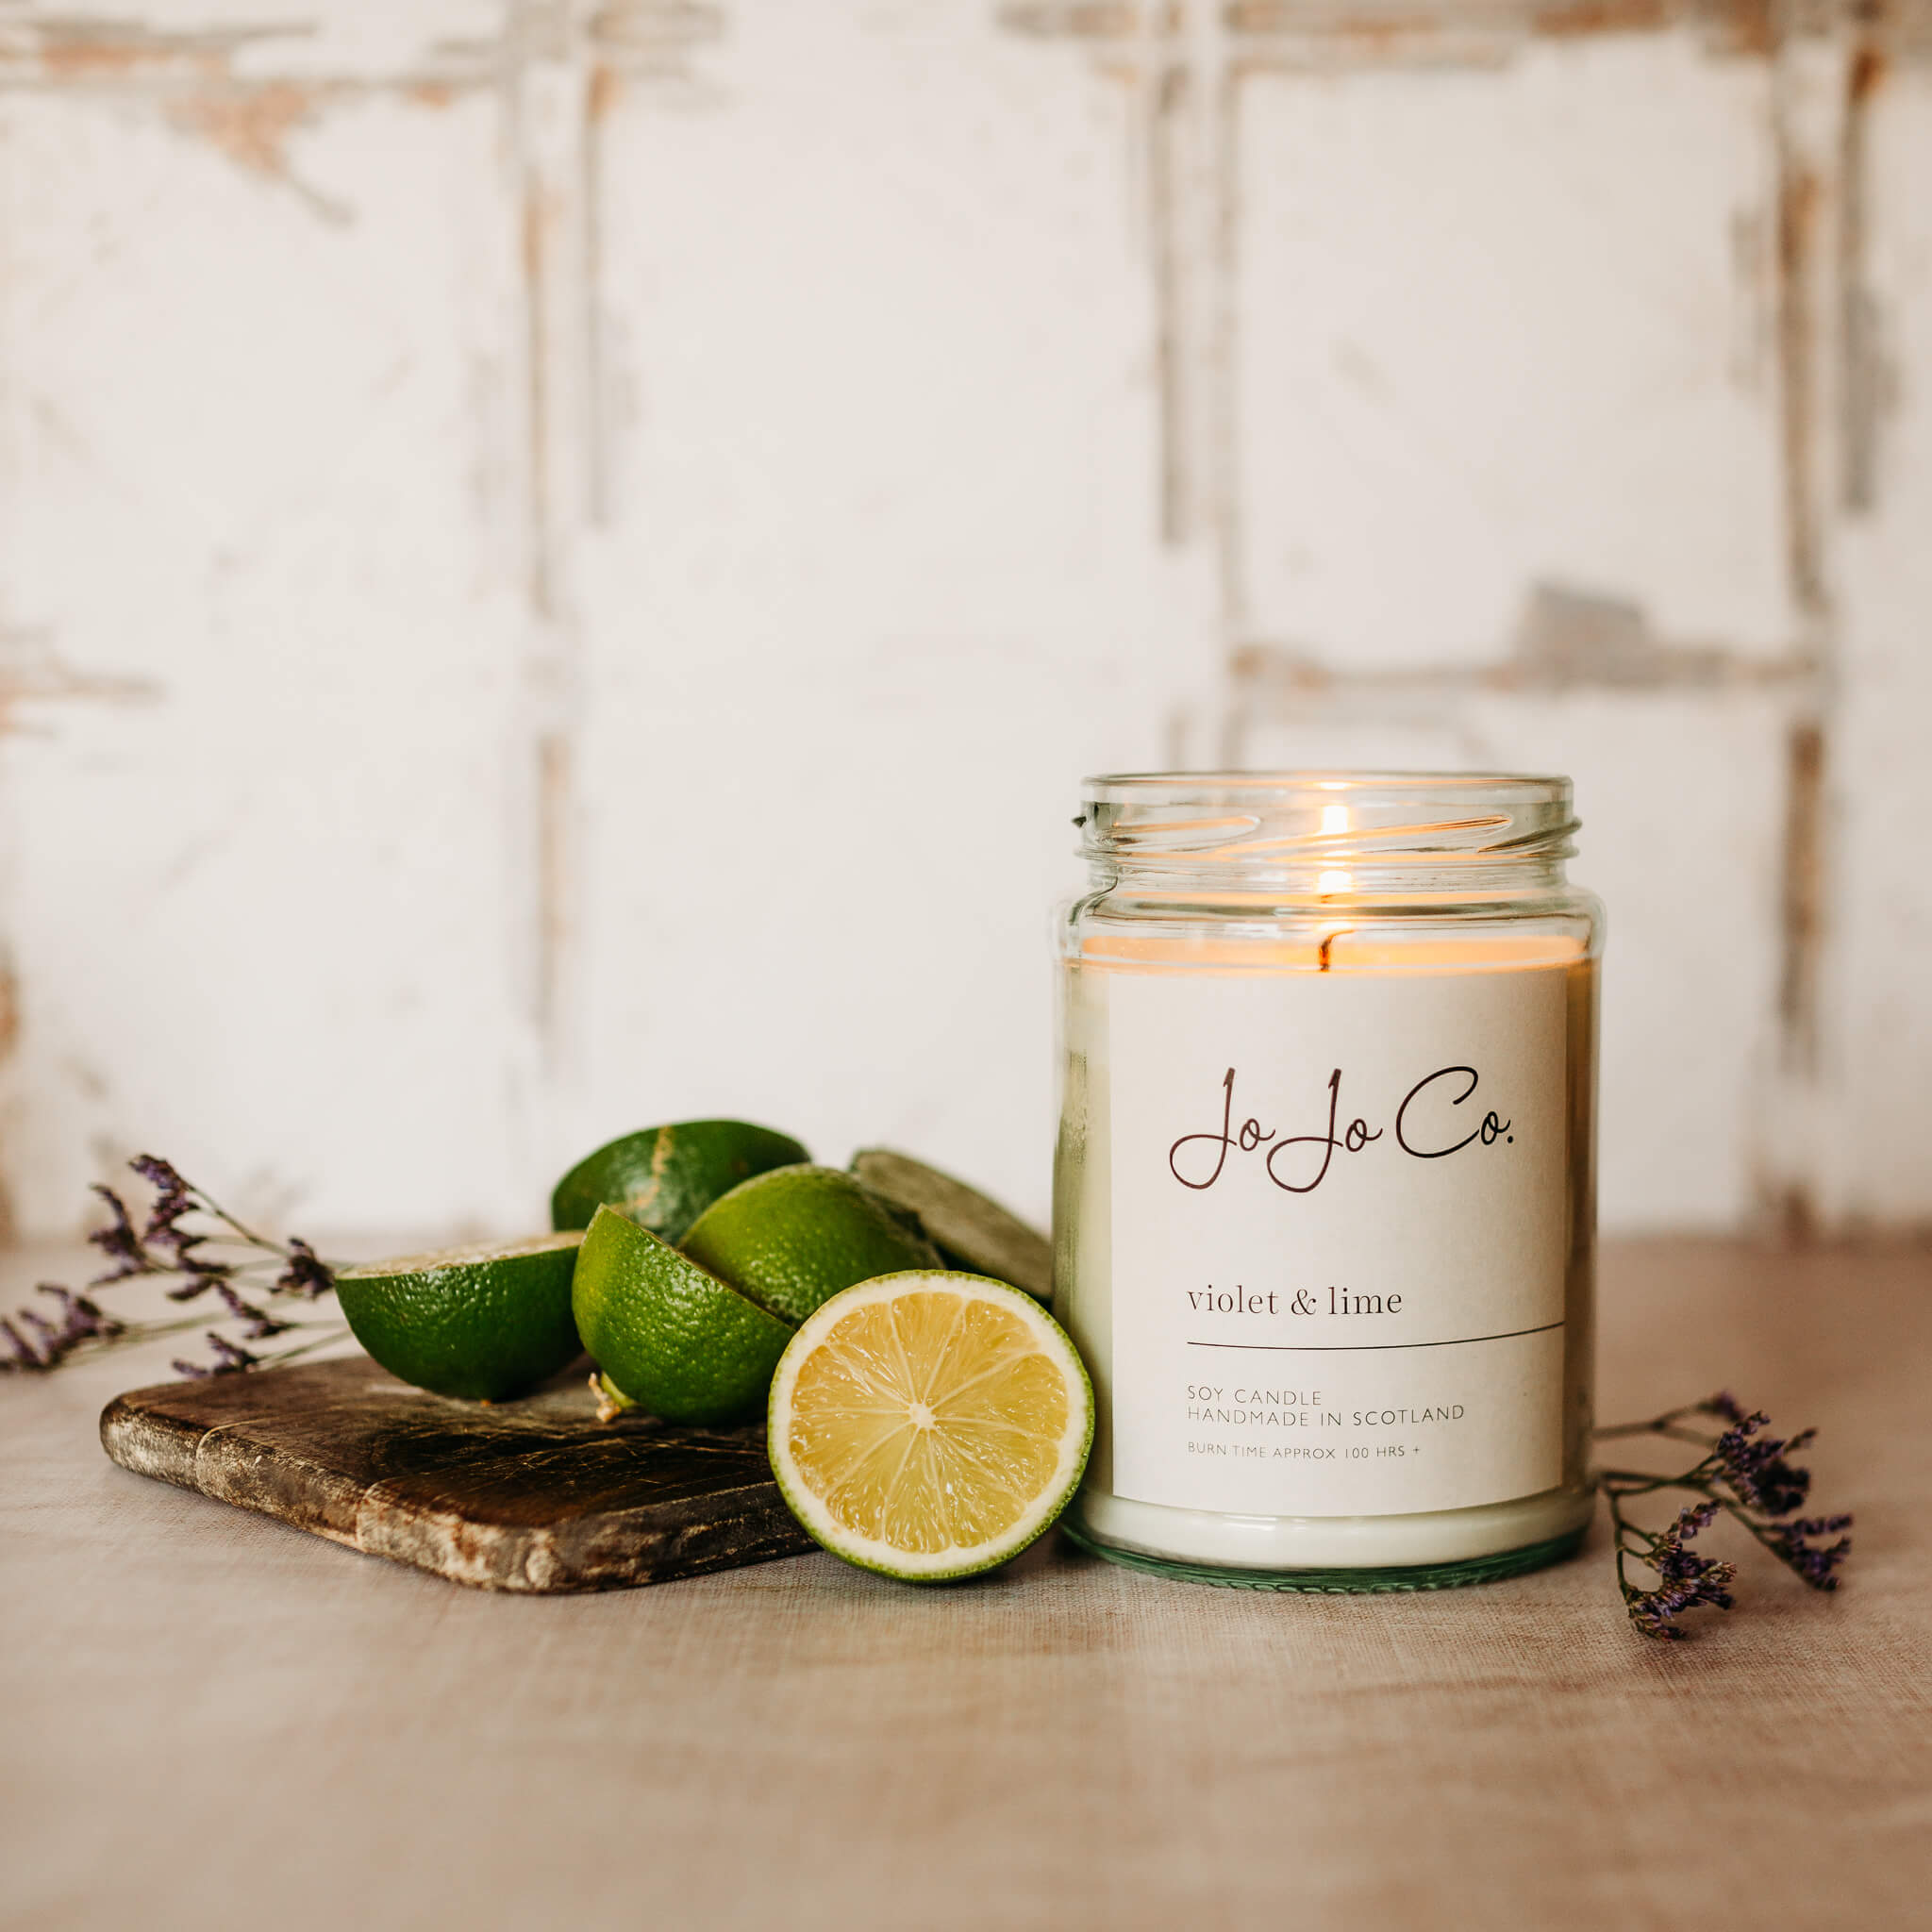 A large JoJo Co. Violet & Lime candle in a glass jar and white label sits in front of a white background. Slices of lime and dried flowers surround the candle. 